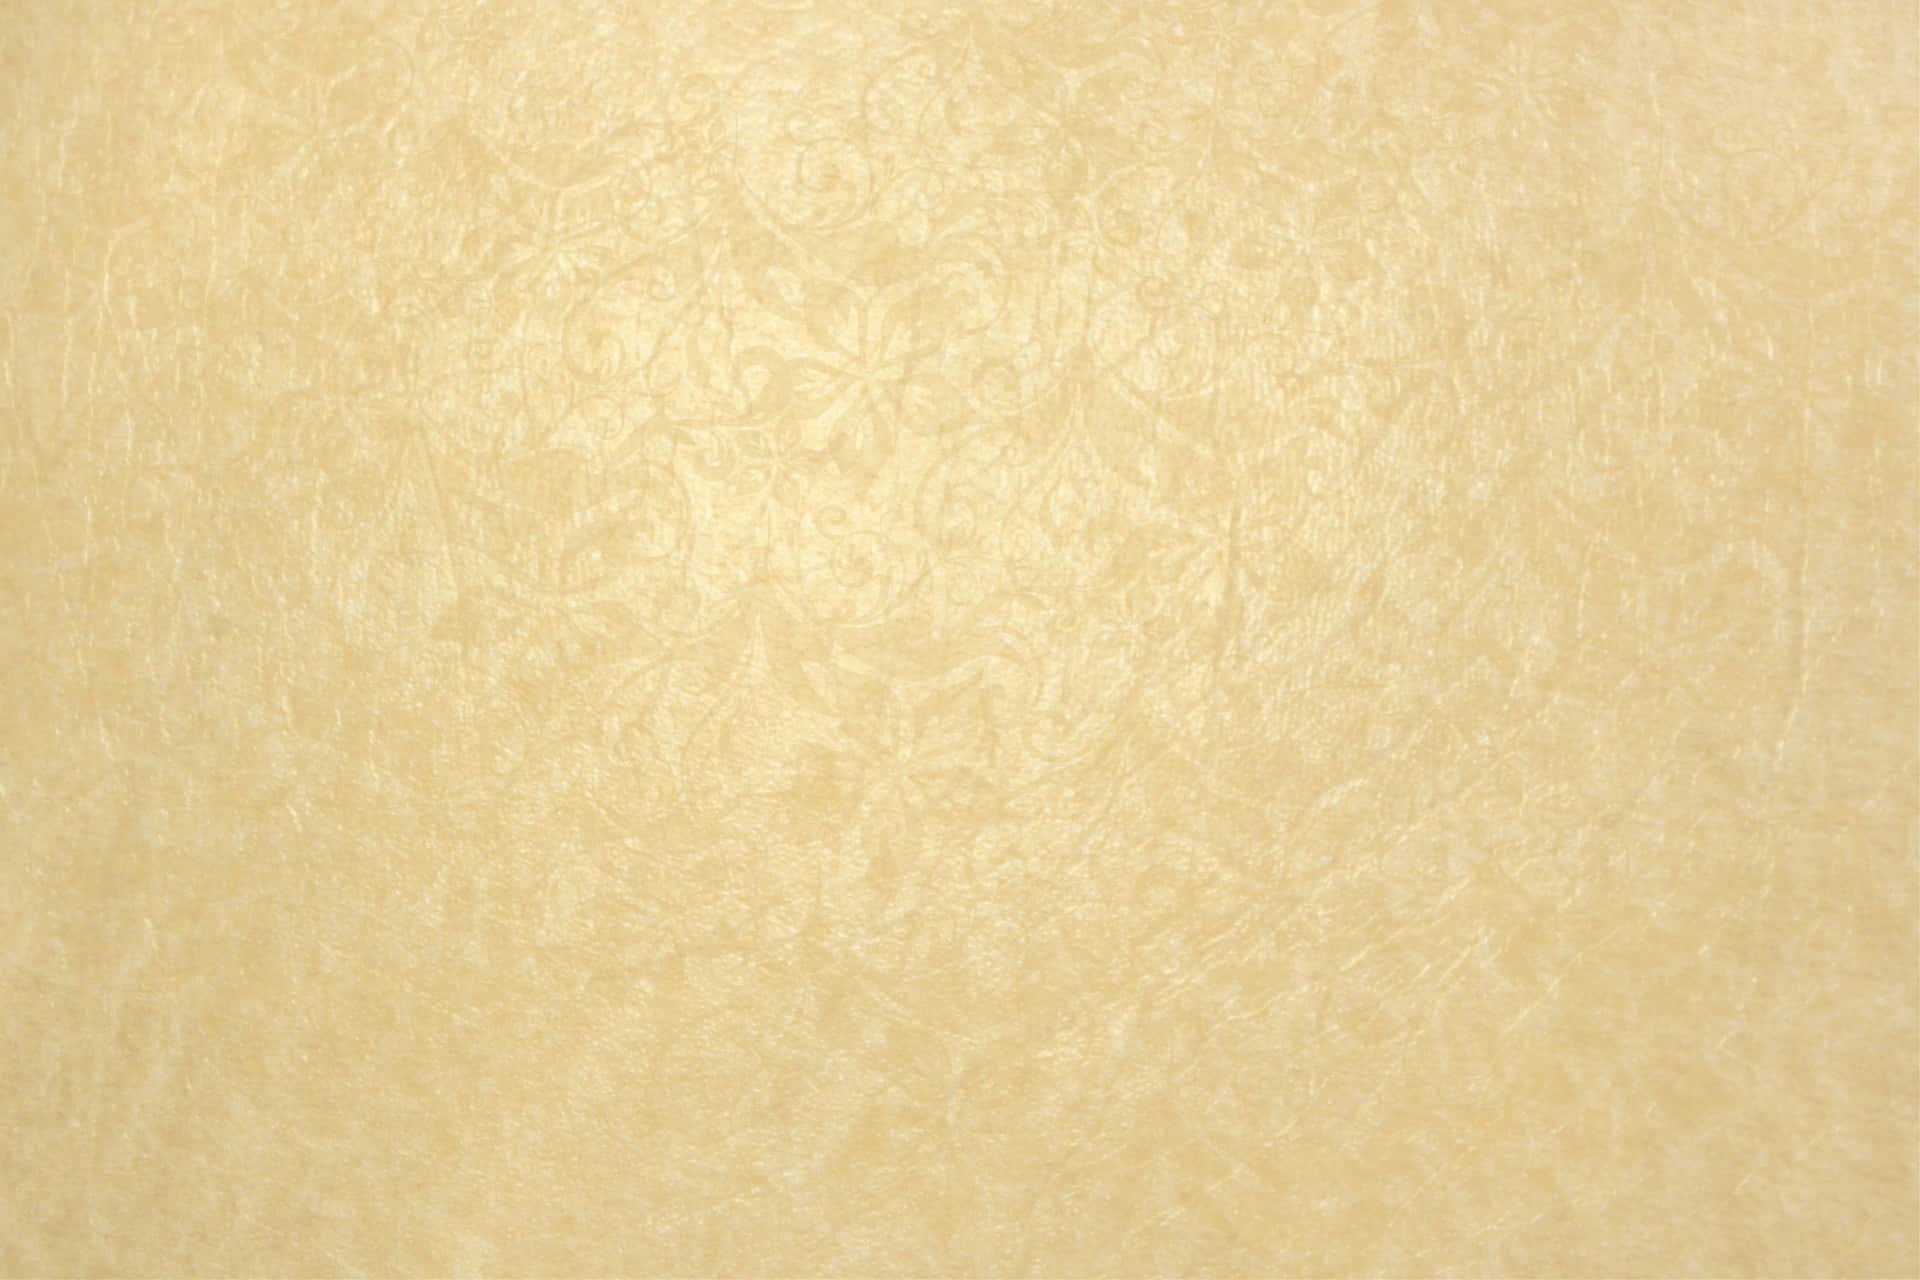 Download Creamy beige background that looks inviting to the eye